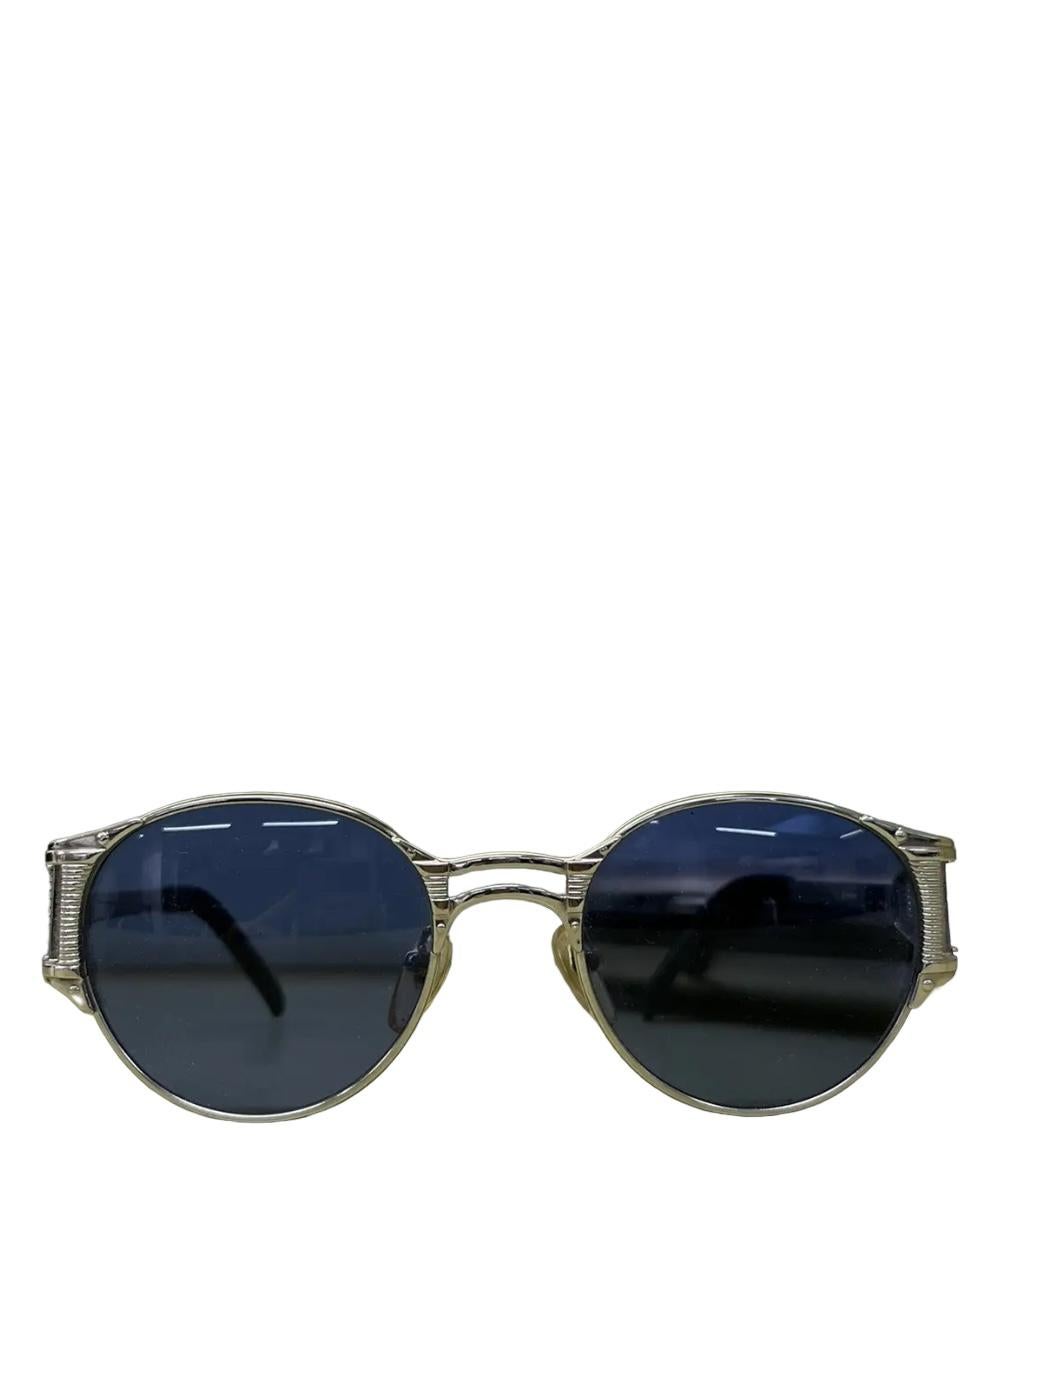 Jean Paul Gaultier
Steam Punk Spring Metal Sunglasses

Beautiful Jean Paul Gaultier metal spring sunglasses with the original case. In great condition, made in Italy.